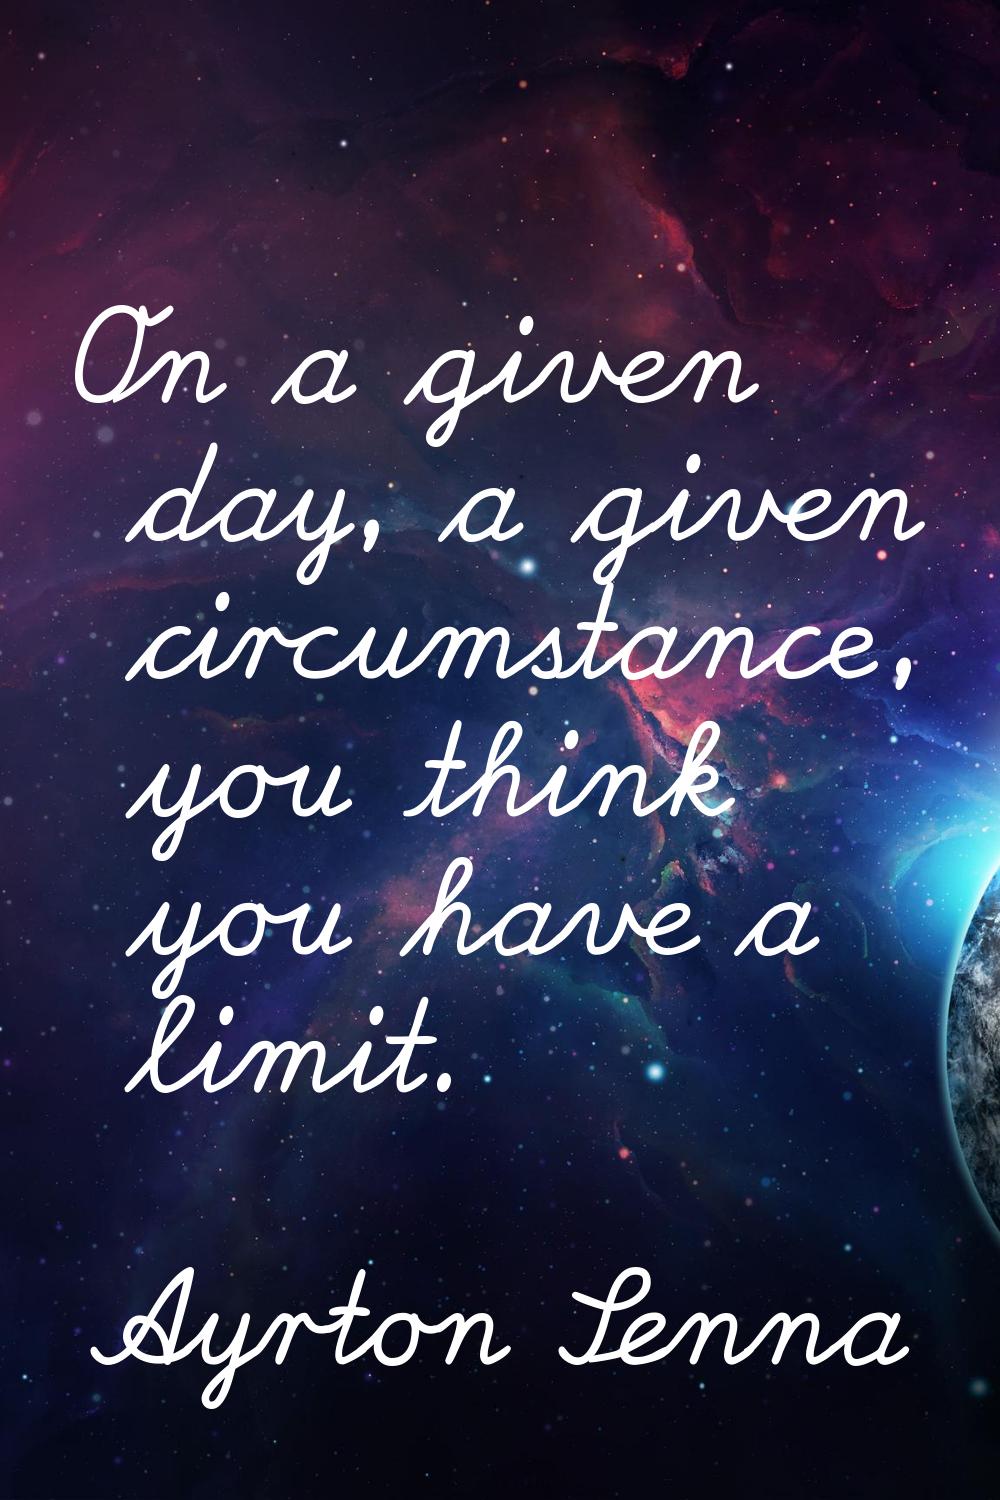 On a given day, a given circumstance, you think you have a limit.